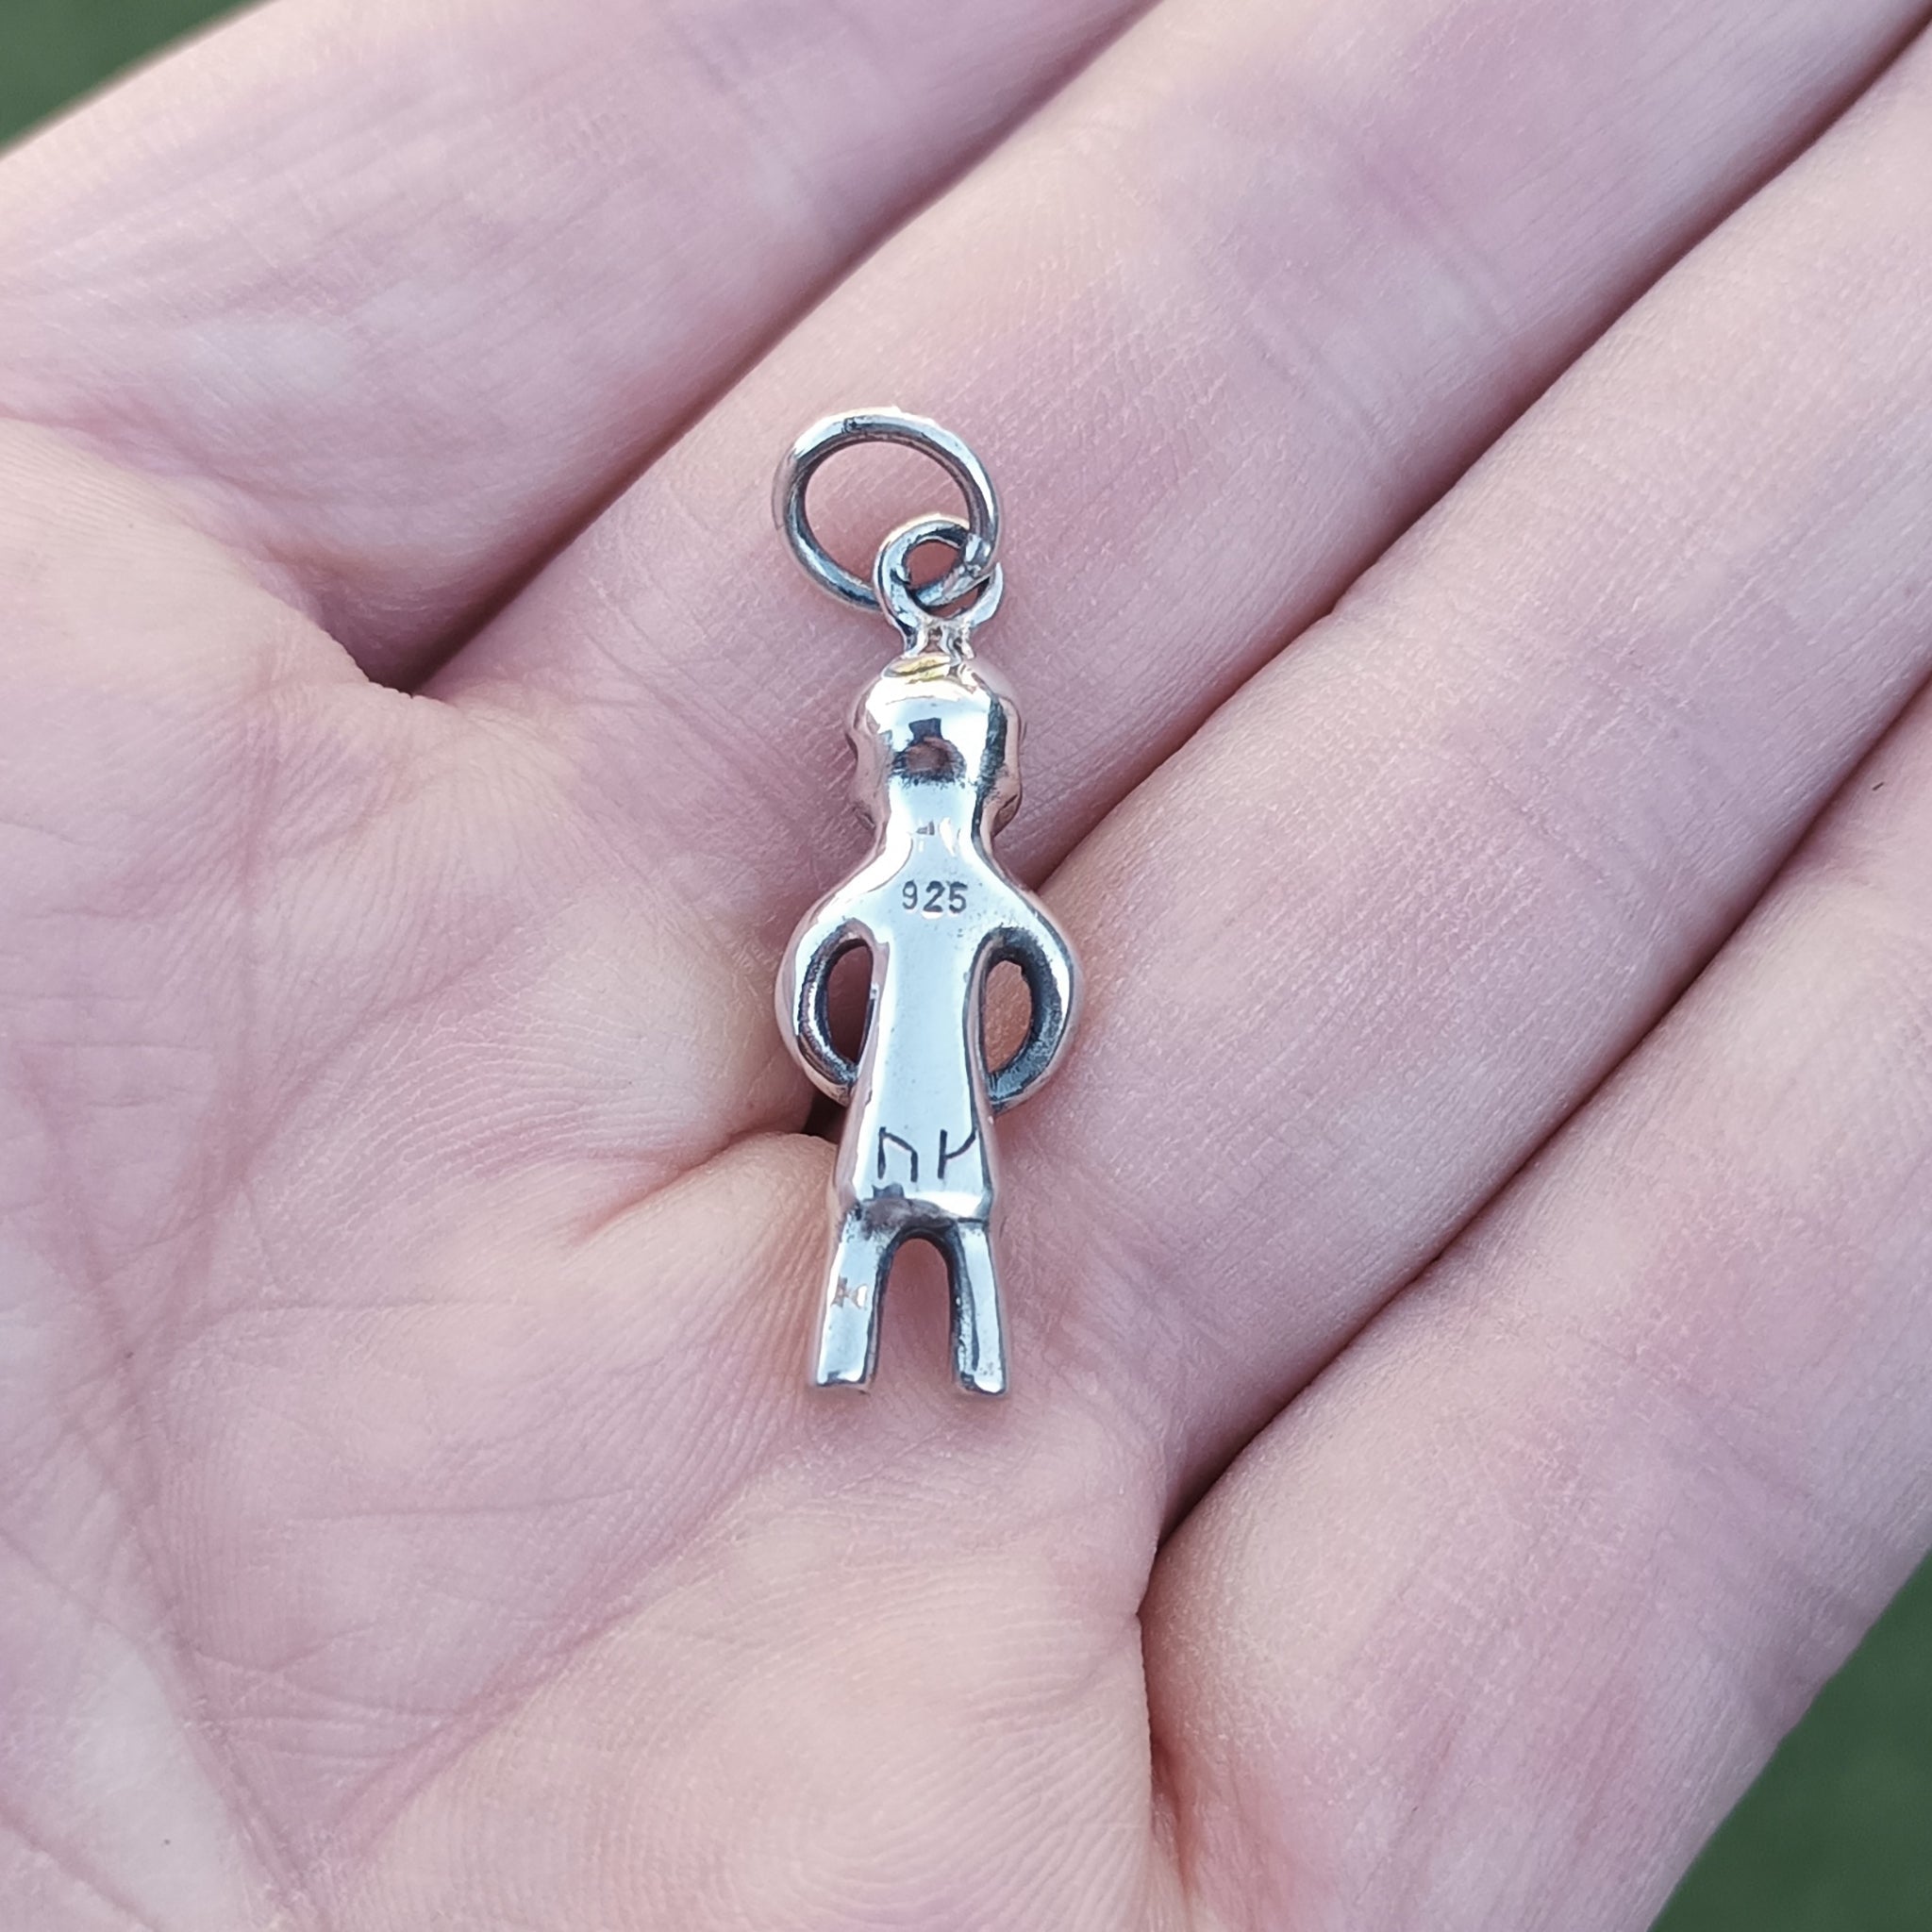 Silver Odin Pendant from Lund on Hand - Back View